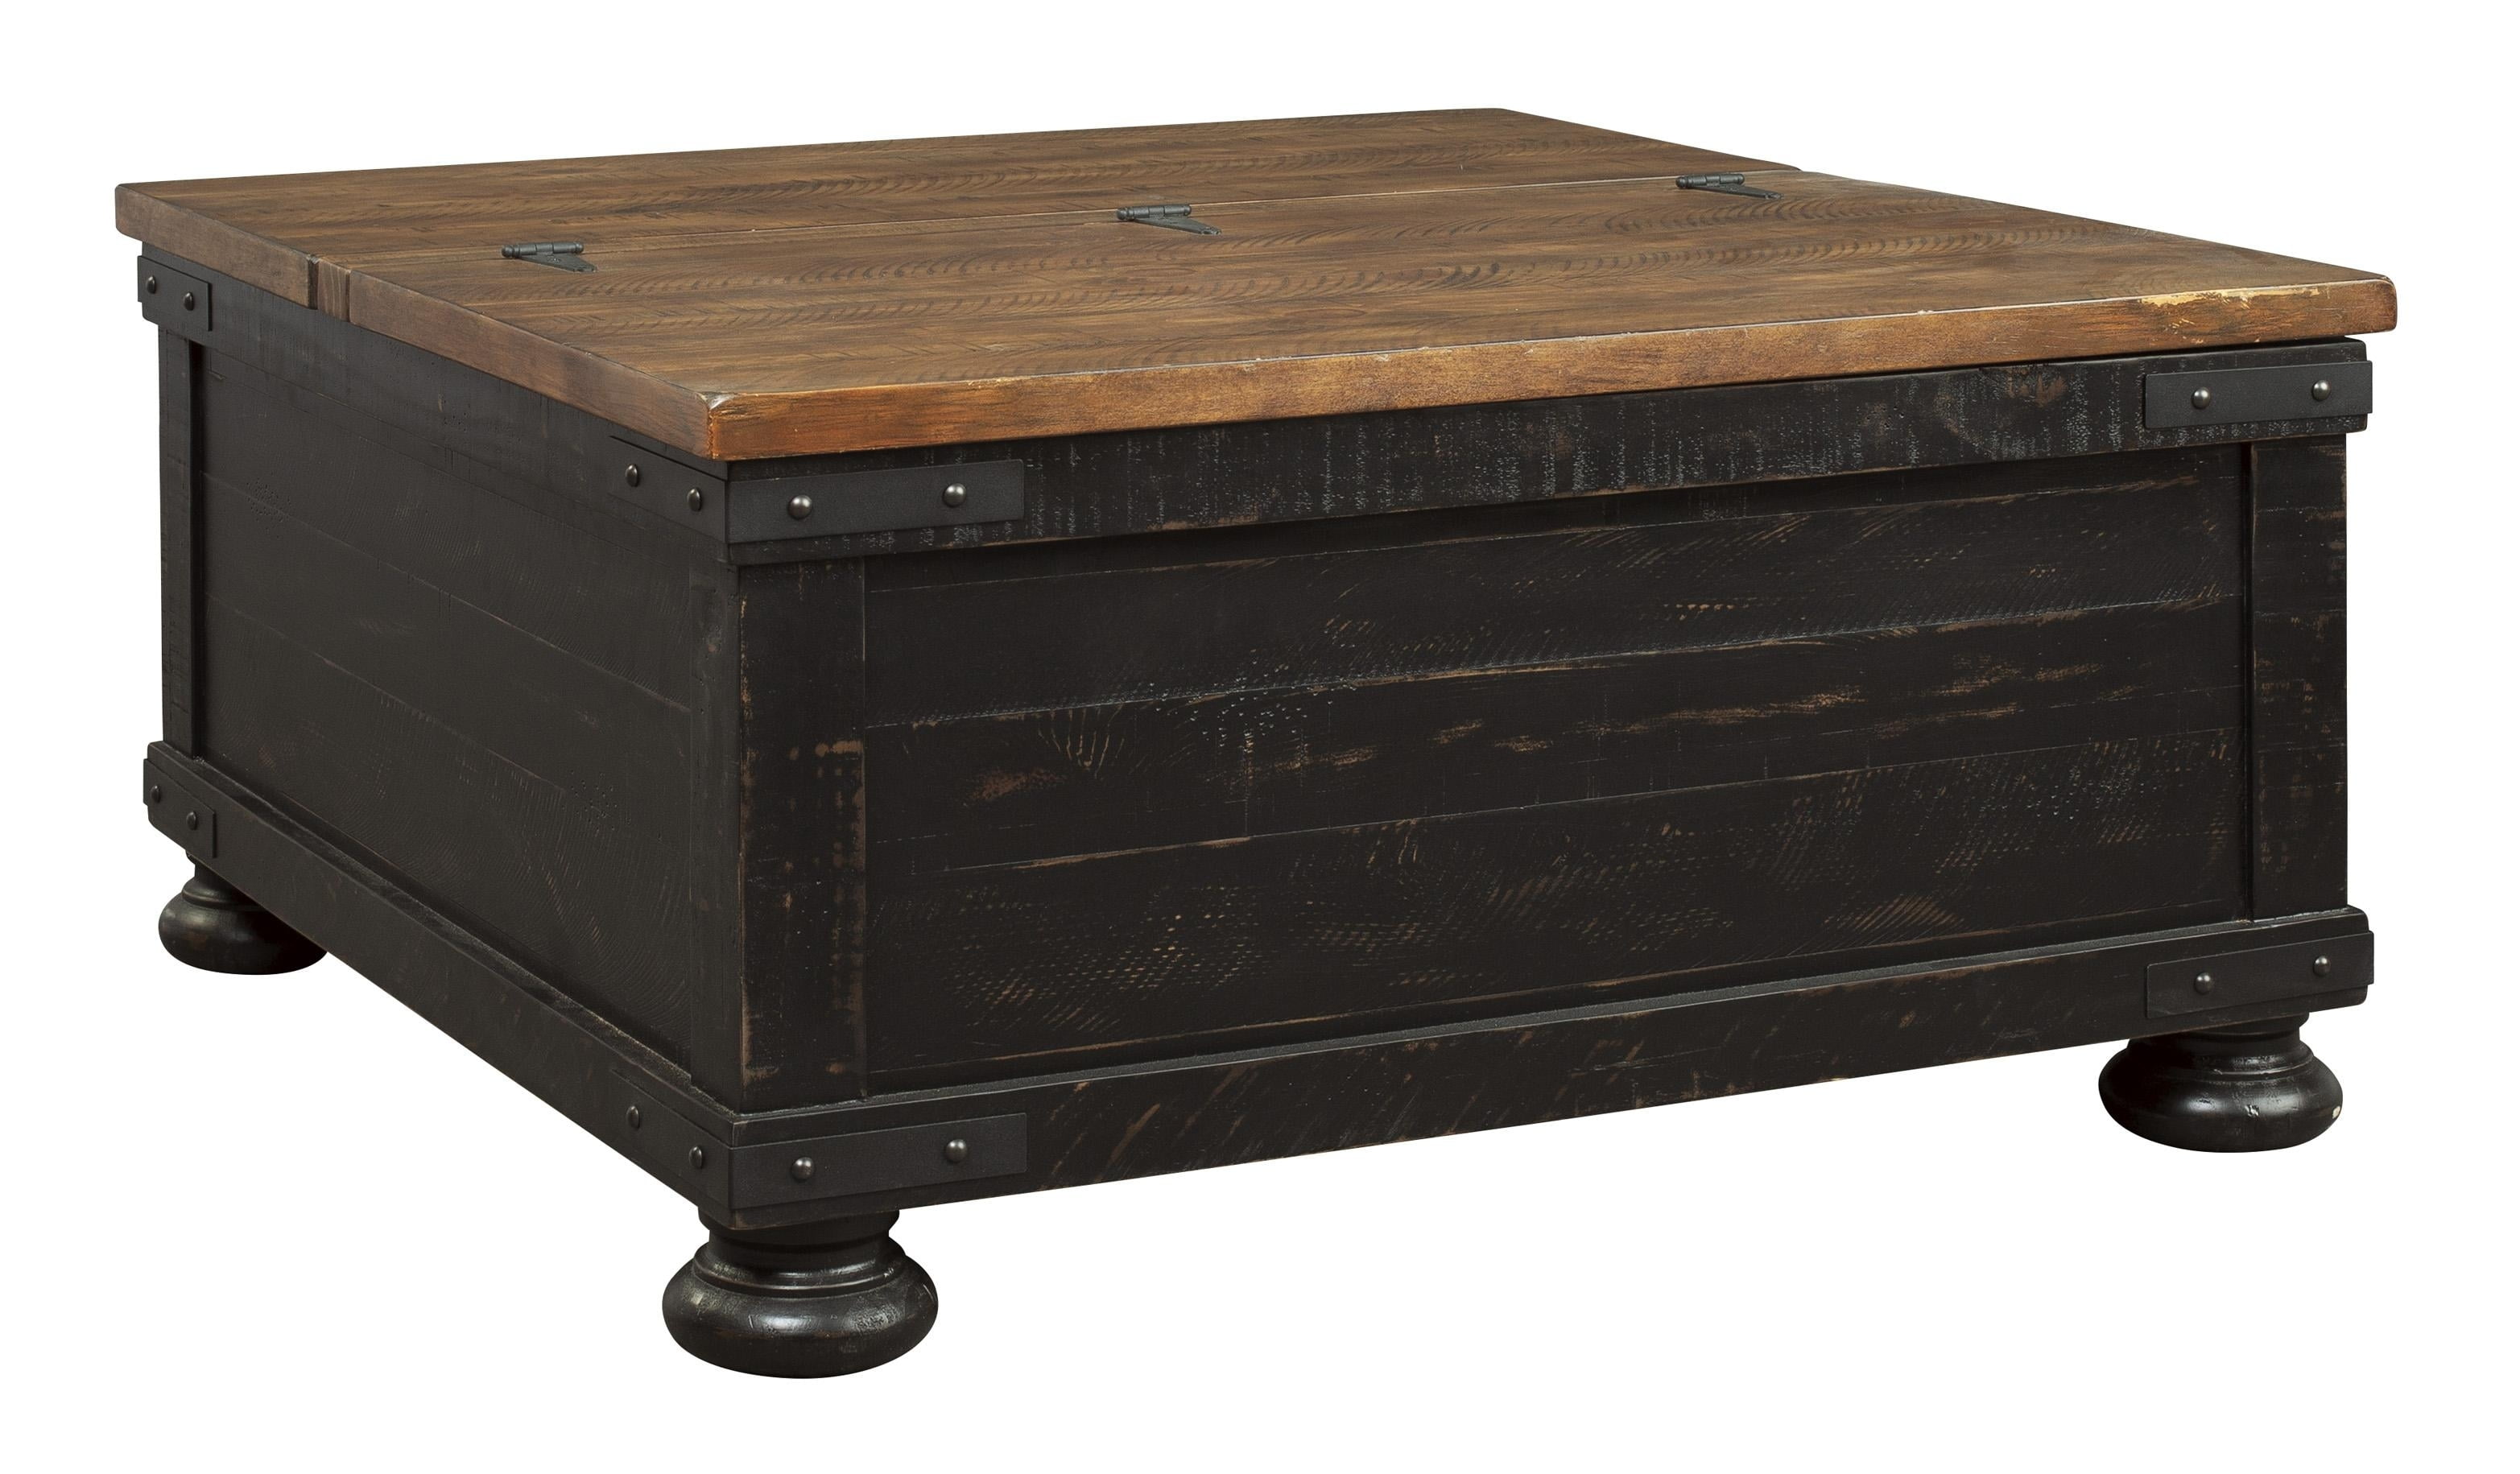 Square Wooden Lift Top Cocktail Table with Trunk Storage, Brown and Black - Walmart.com ...